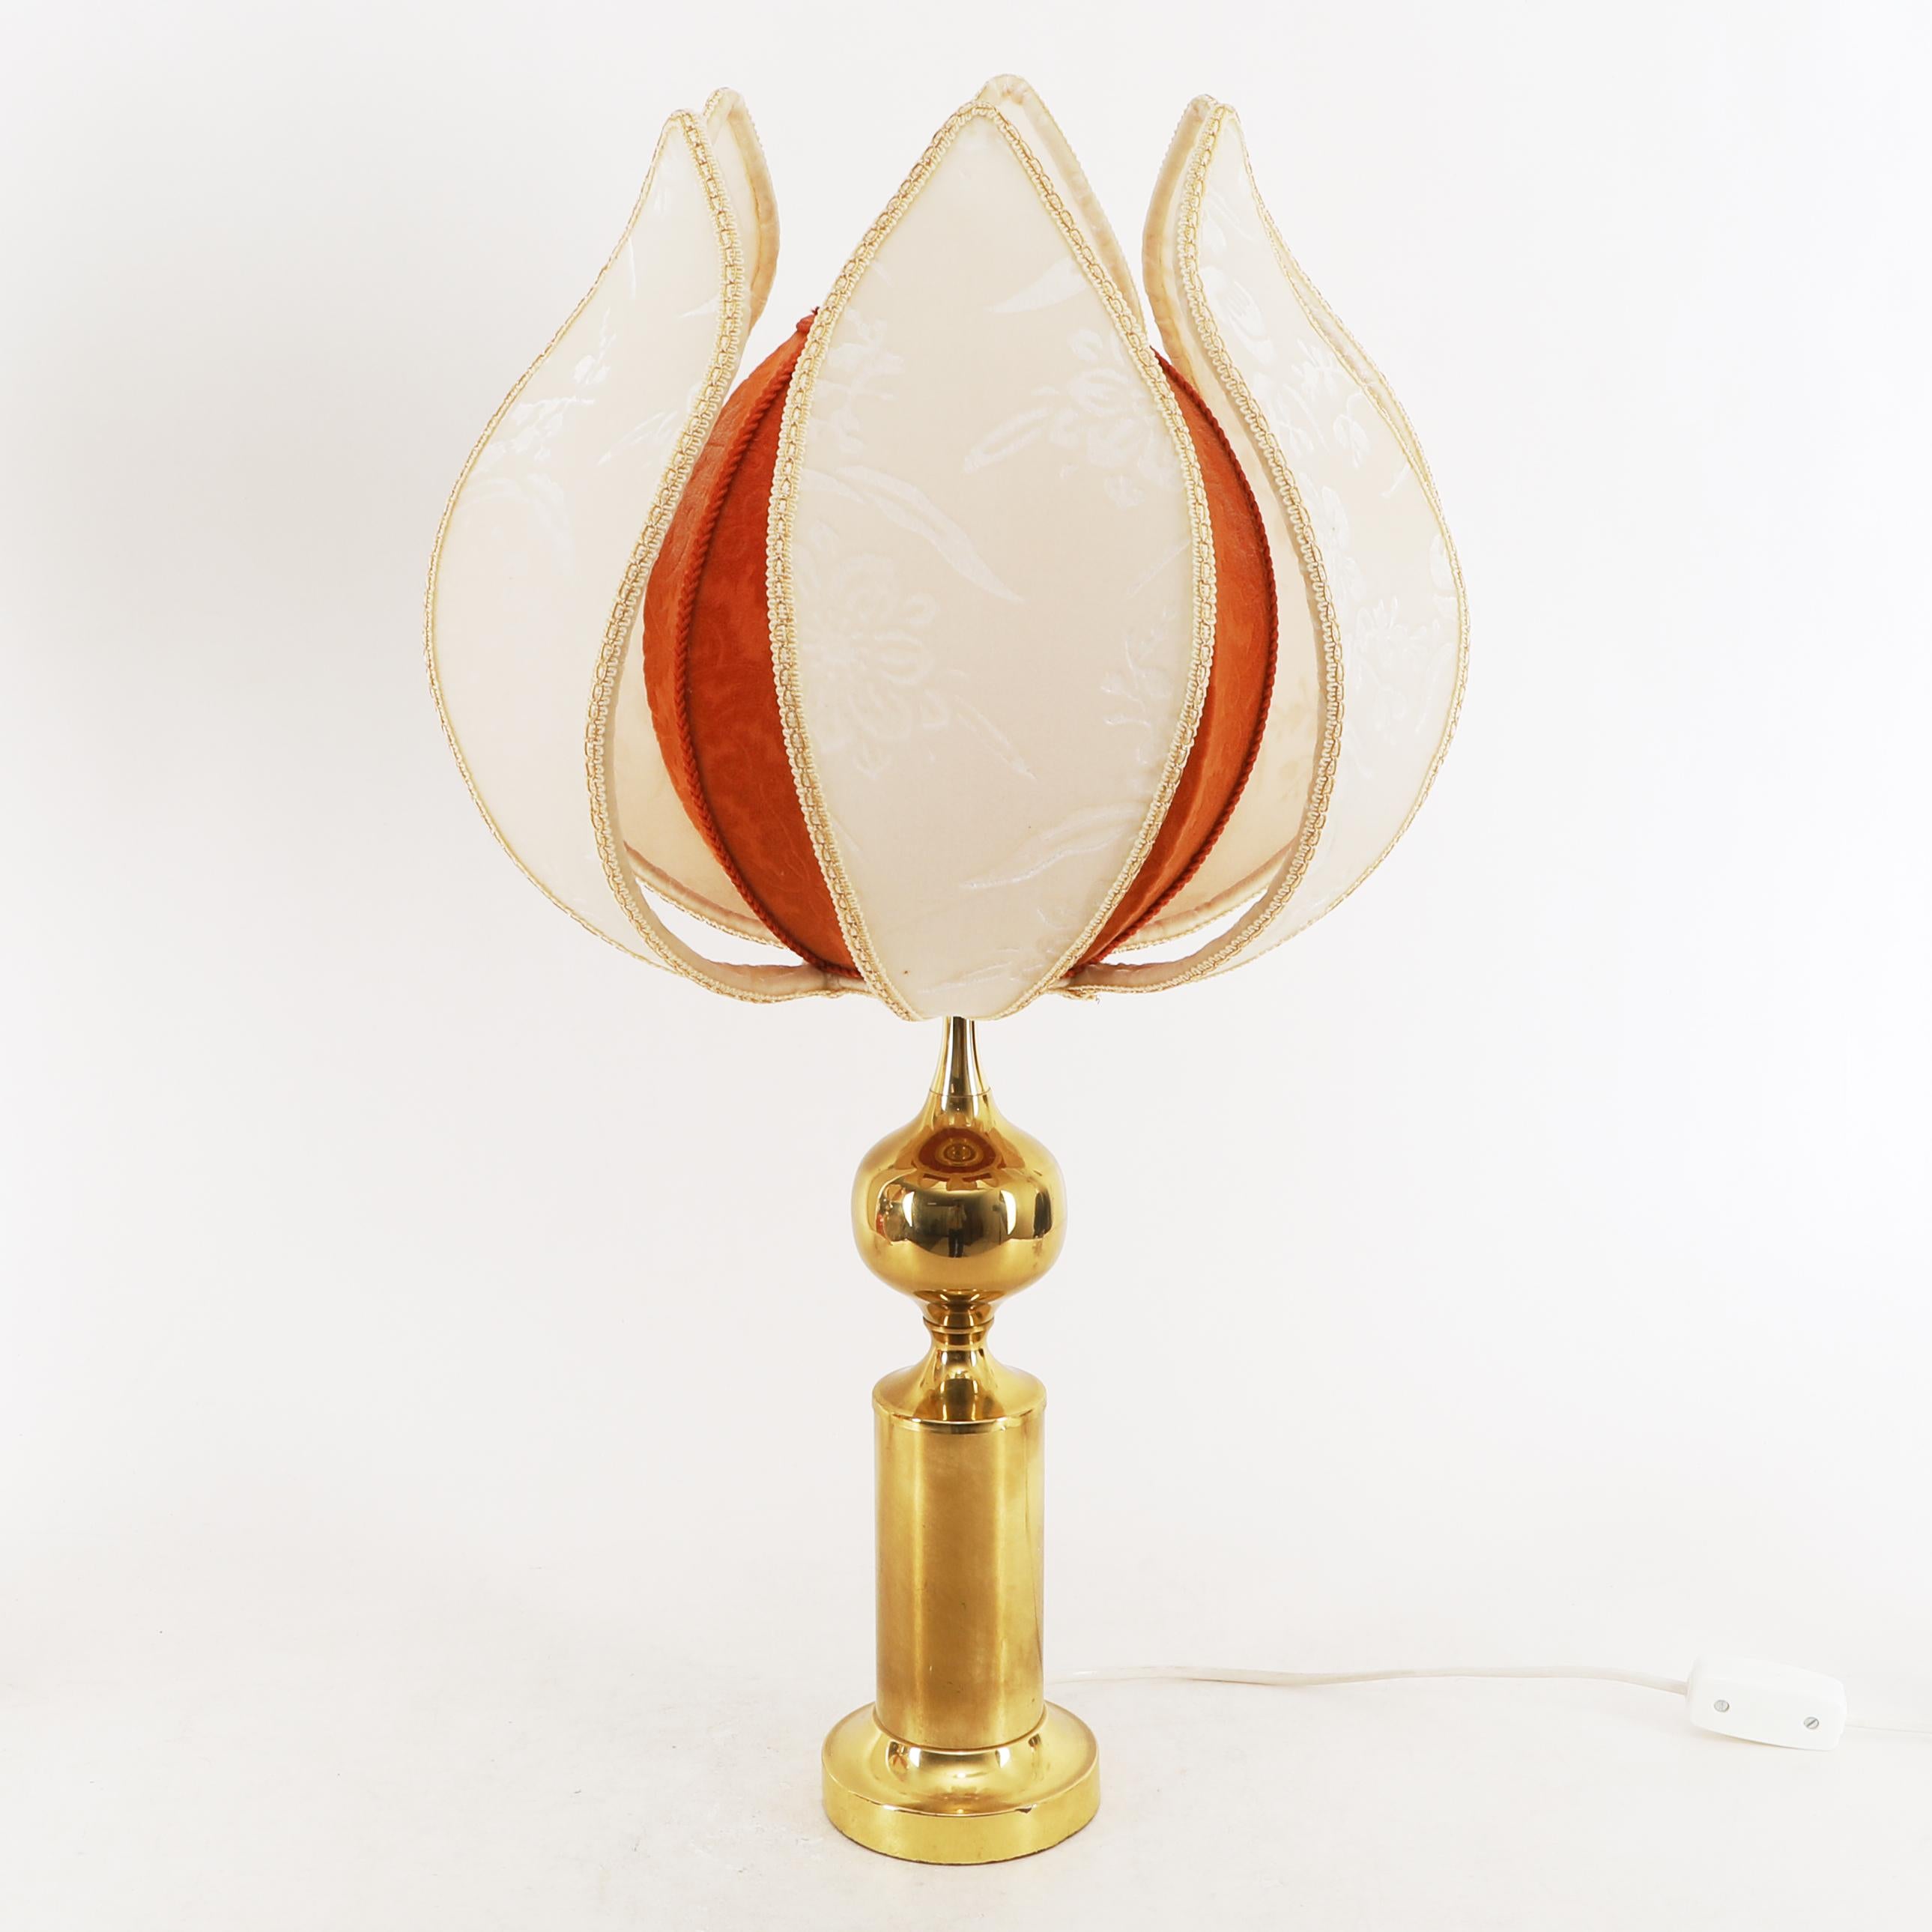 Pair of mid century table lamps. Lampshade fabric in the shape of tulip
European plug. Super fun, and unusual. Shades in great vintage condition!